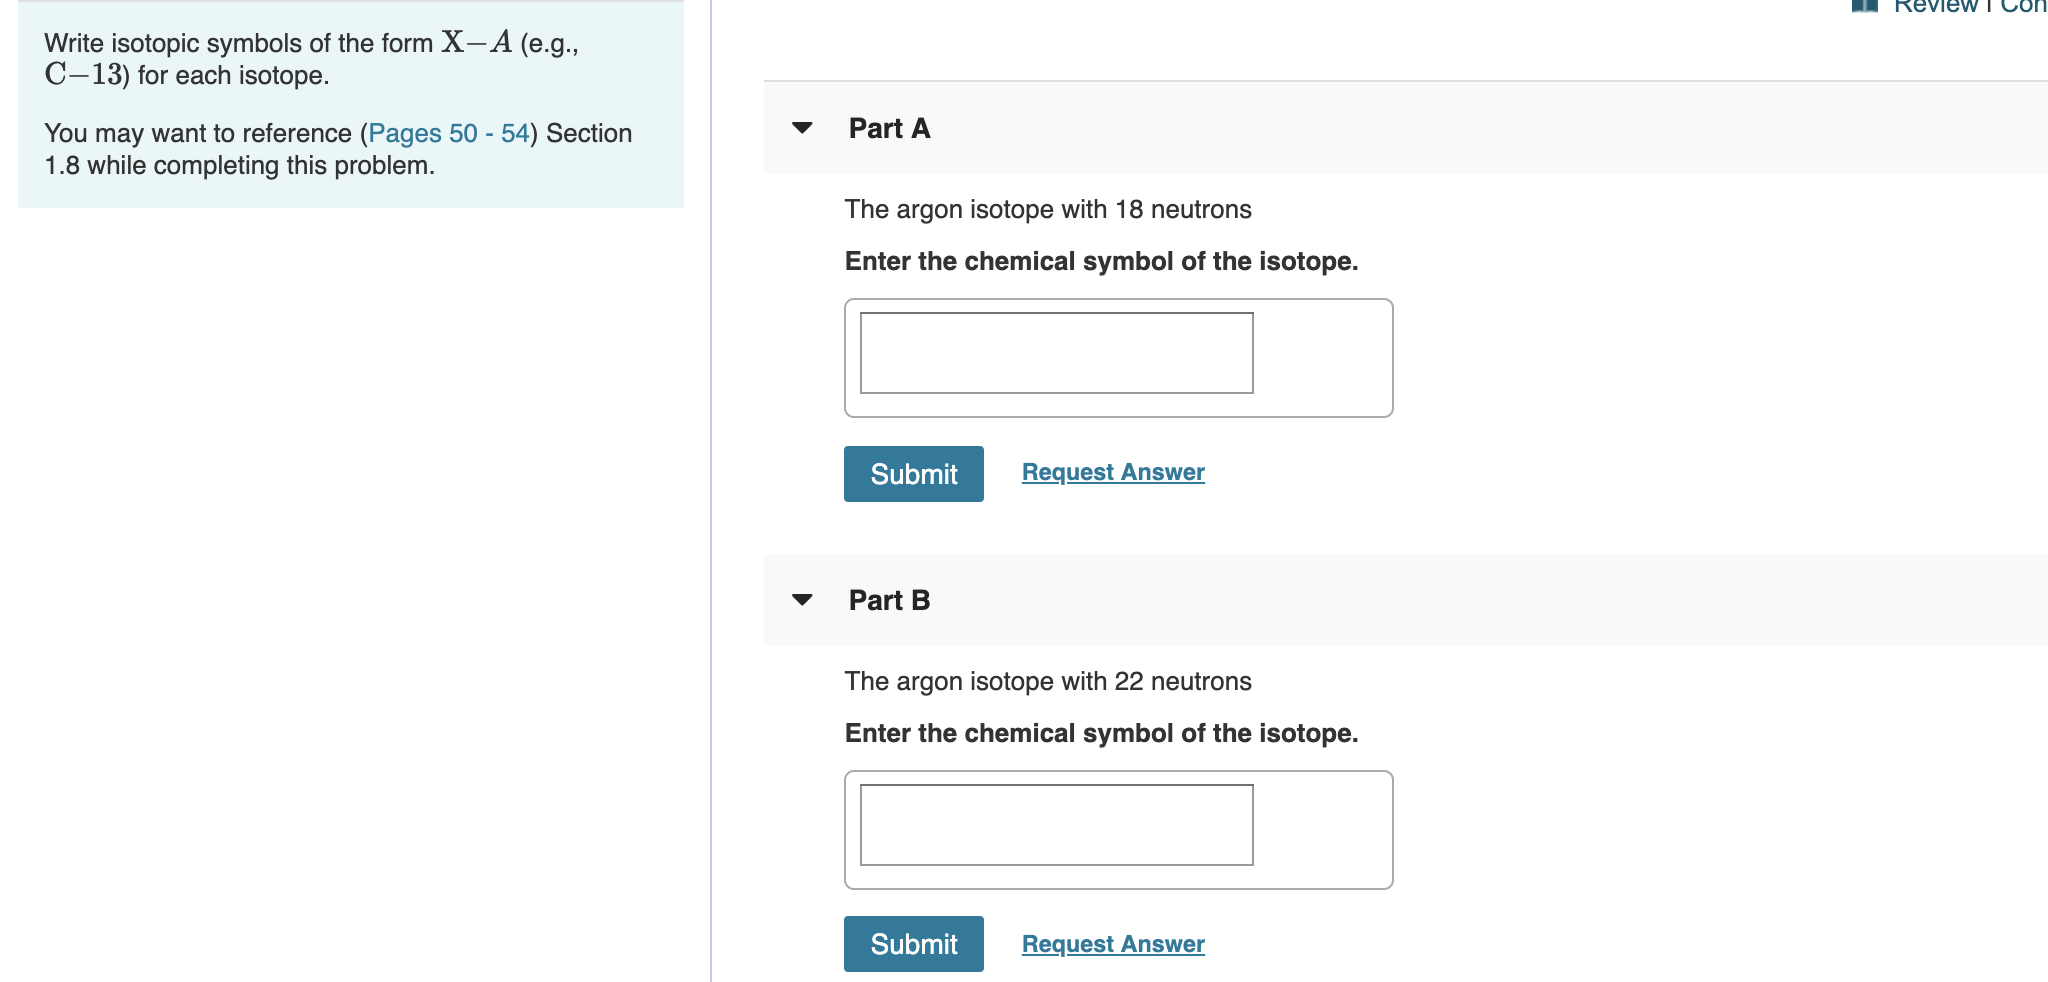 Review T CO
Write isotopic symbols of the form X- A (e.g.
C-13) for each isotope.
Part A
You may want to reference (Pages 50 - 54) Section
1.8 while completing this problem.
The argon isotope with 18 neutrons
Enter the chemical symbol of the isotope.
Request Answer
Submit
Part B
The argon isotope with 22 neutrons
Enter the chemical symbol of the isotope.
Submit
Request Answer
